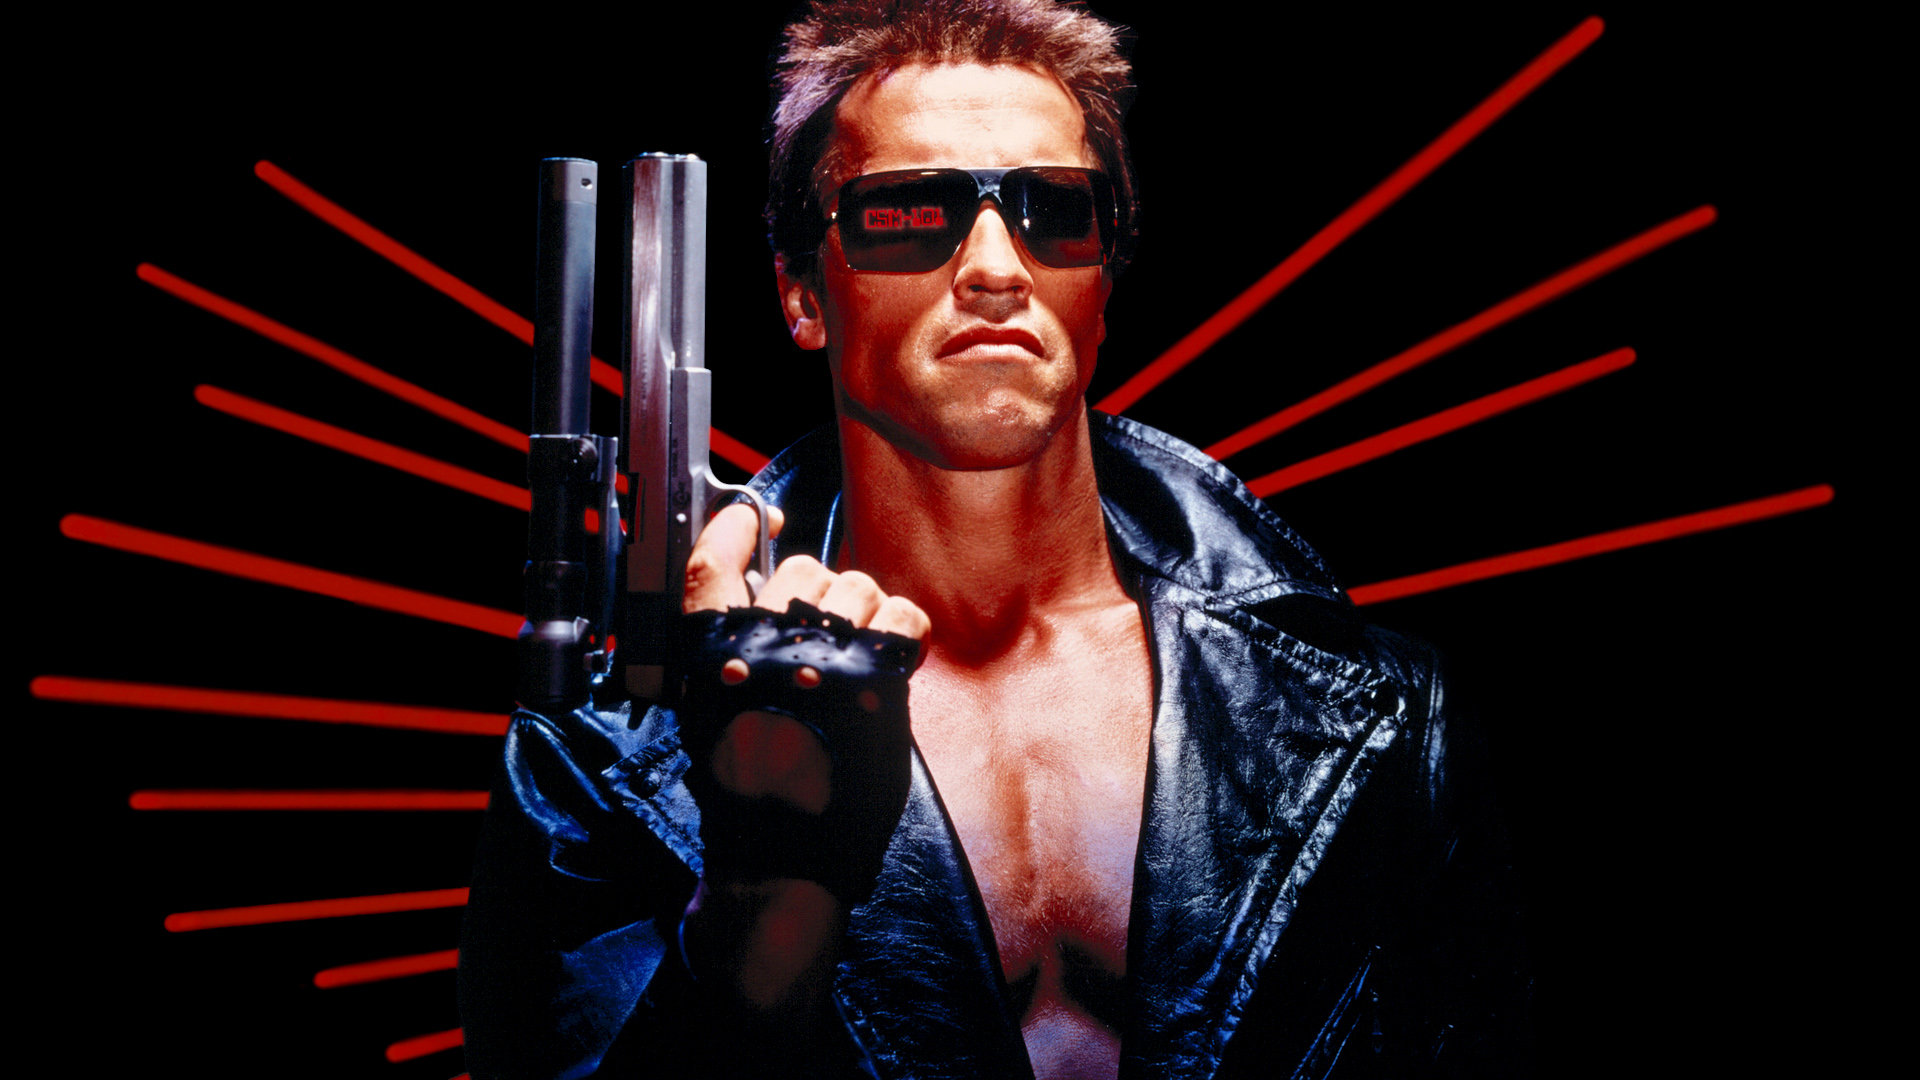 The Terminator Backgrounds, Compatible - PC, Mobile, Gadgets| 1920x1080 px